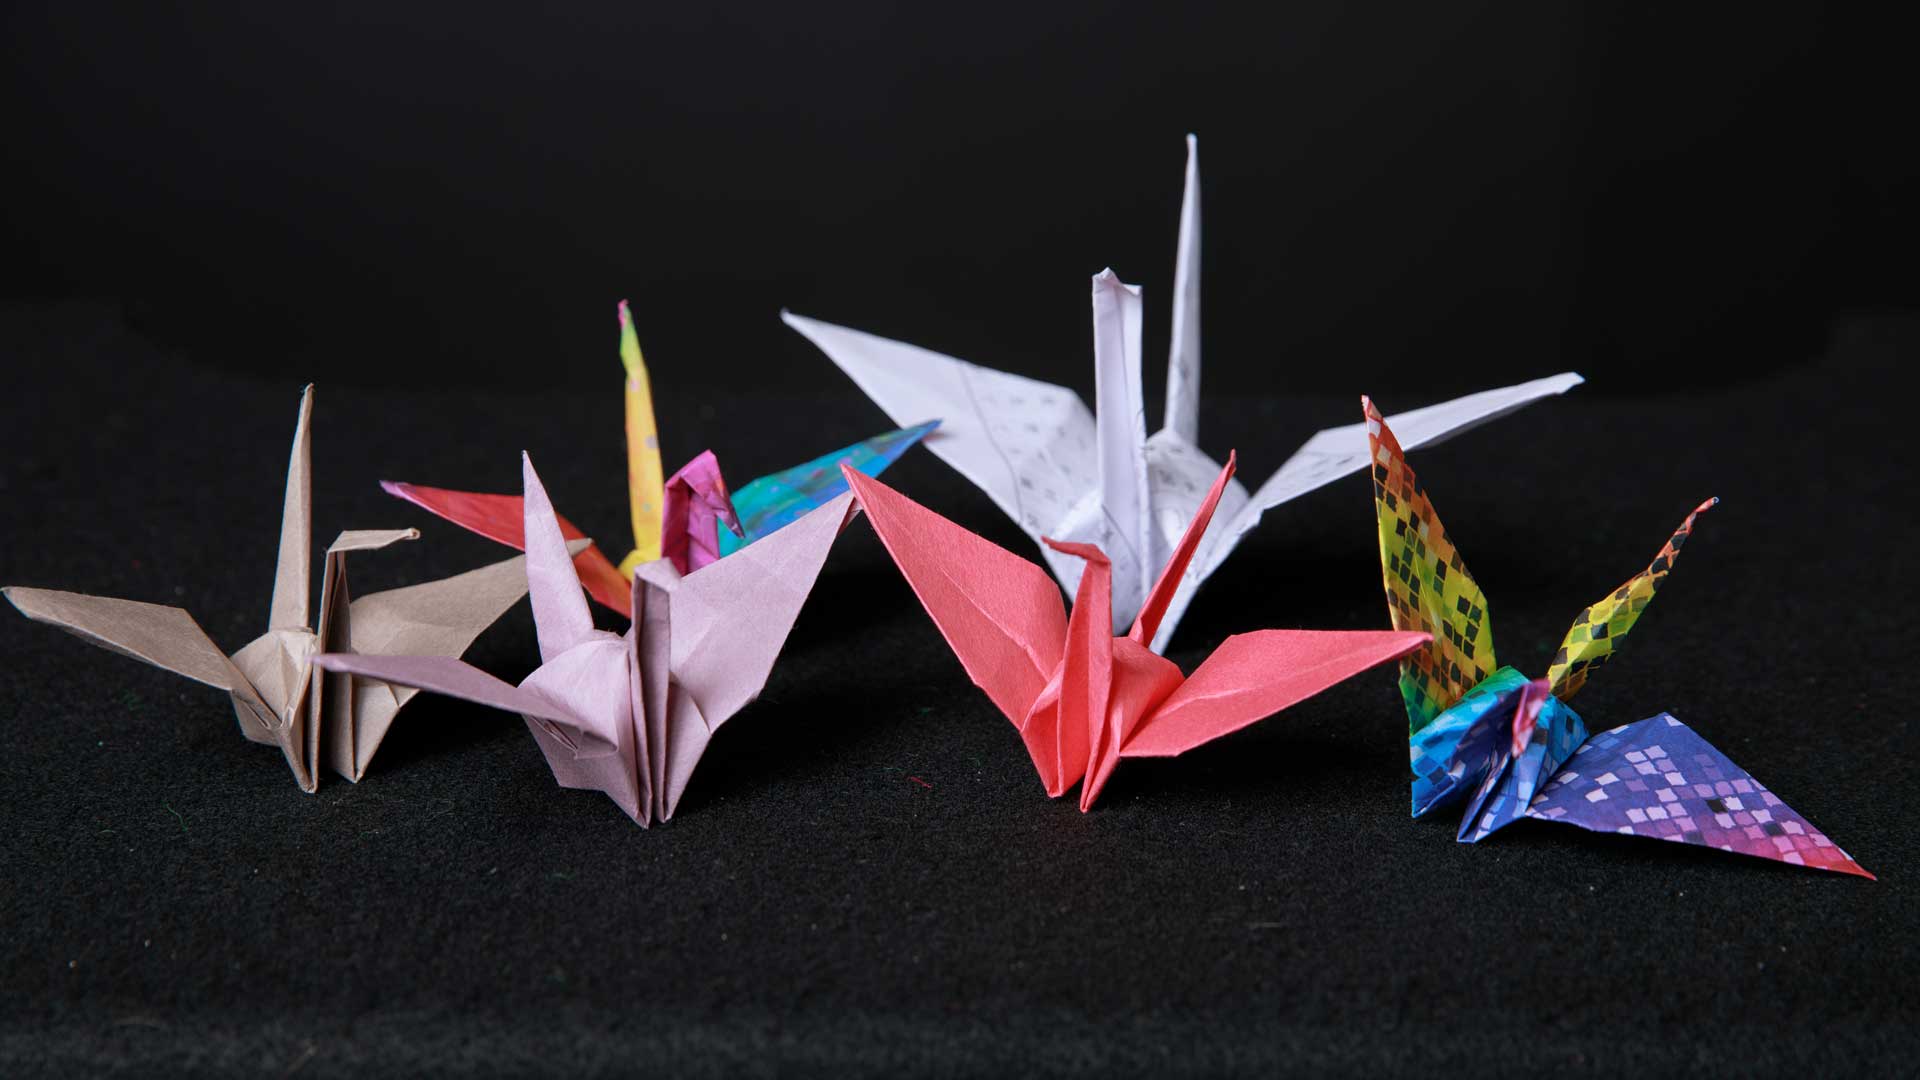 More than Folding Paper': a Look at Origami - University of Alabama News